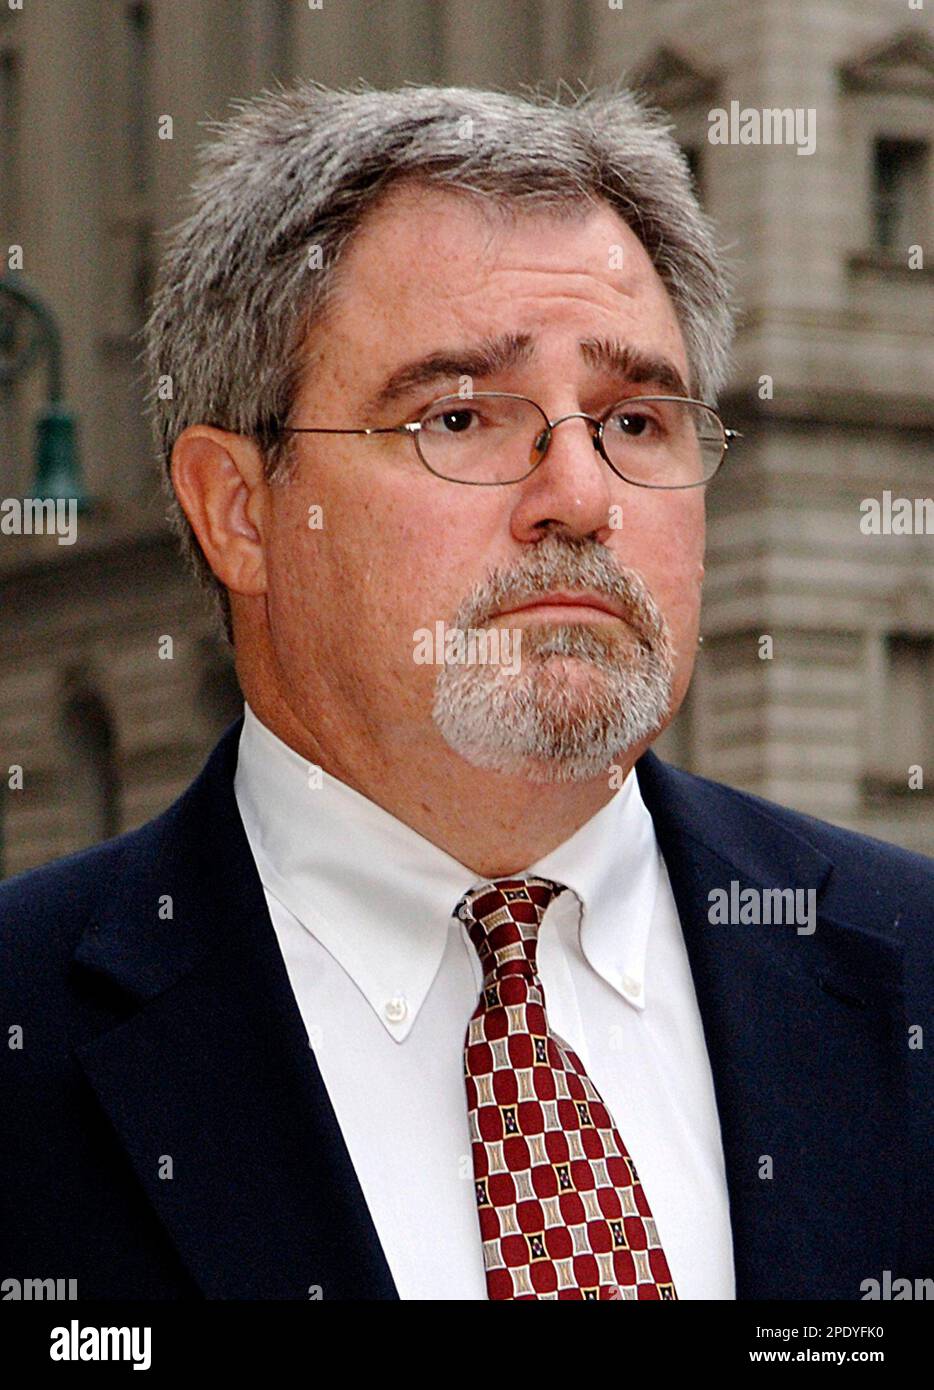 Former director of general accounting for Worldcom Inc. Buford Yates enters Manhattan federal court, Tuesday, Aug. 9, 2005, in New York. Yates will be sentenced Tuesday in the $11 billion accounting scandal that bankrupted the telecommunications company. (AP Photo/ Louis Lanzano) Stock Photo